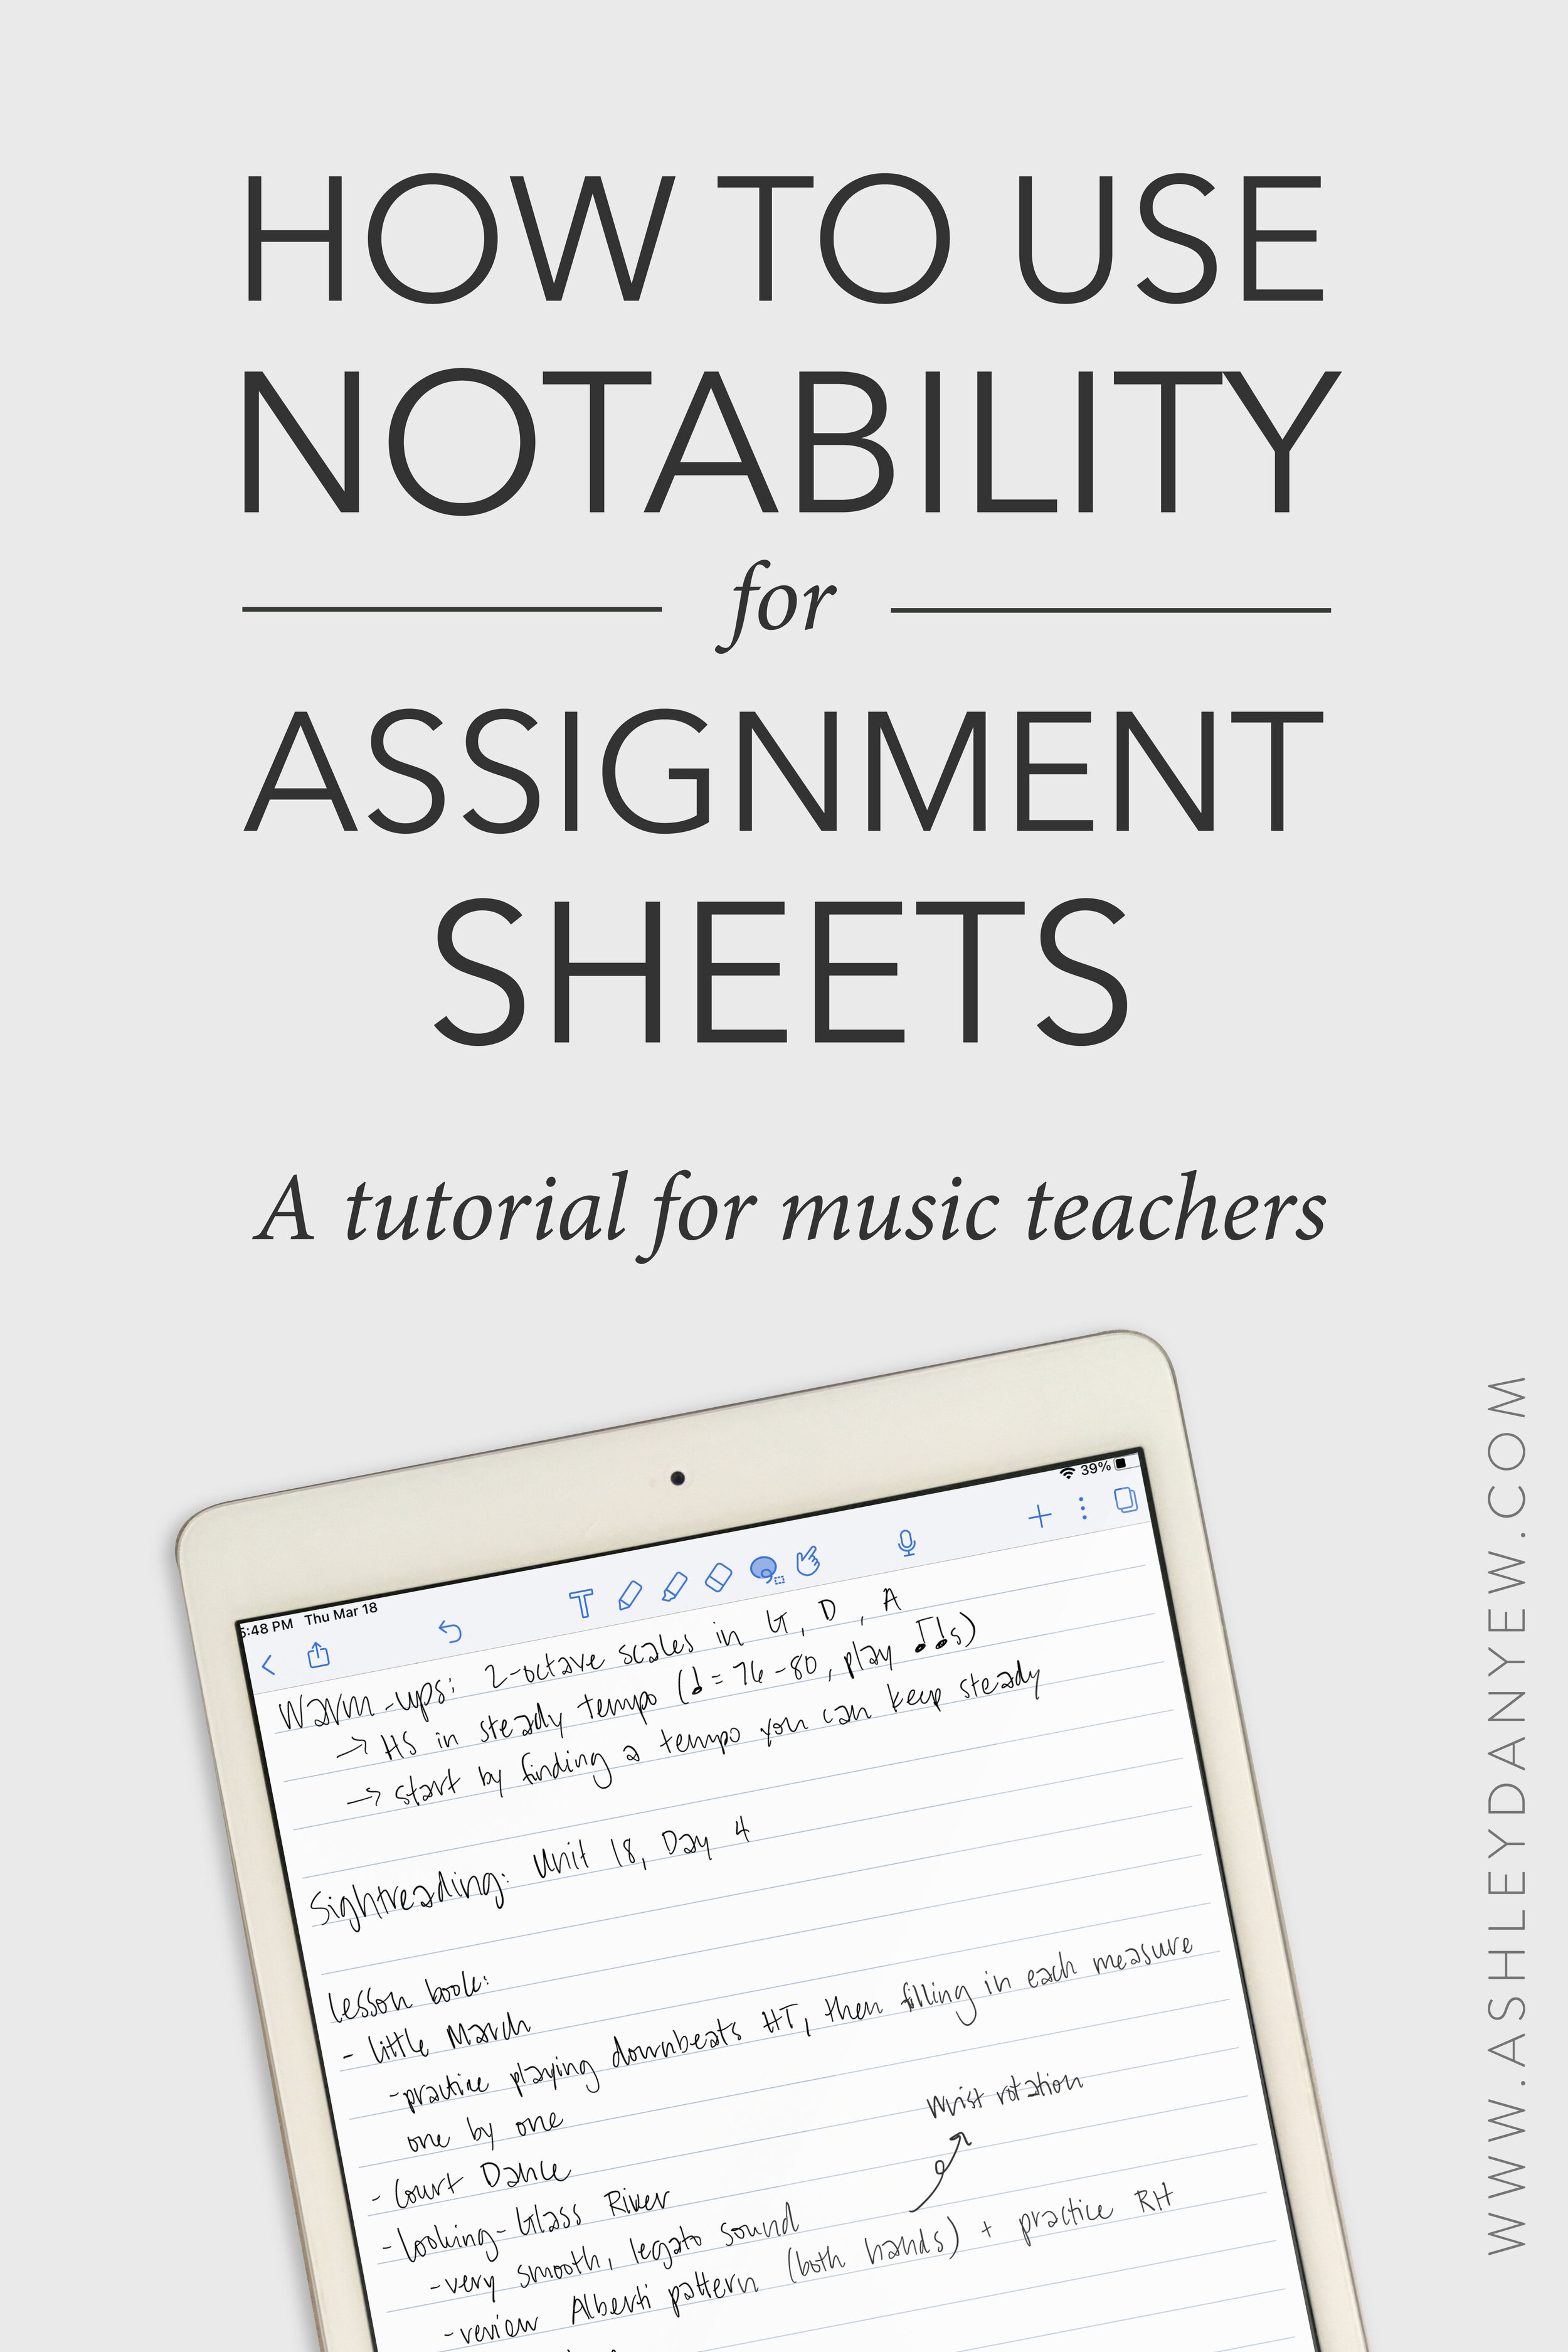 How to Use Notability for Assignment Sheets